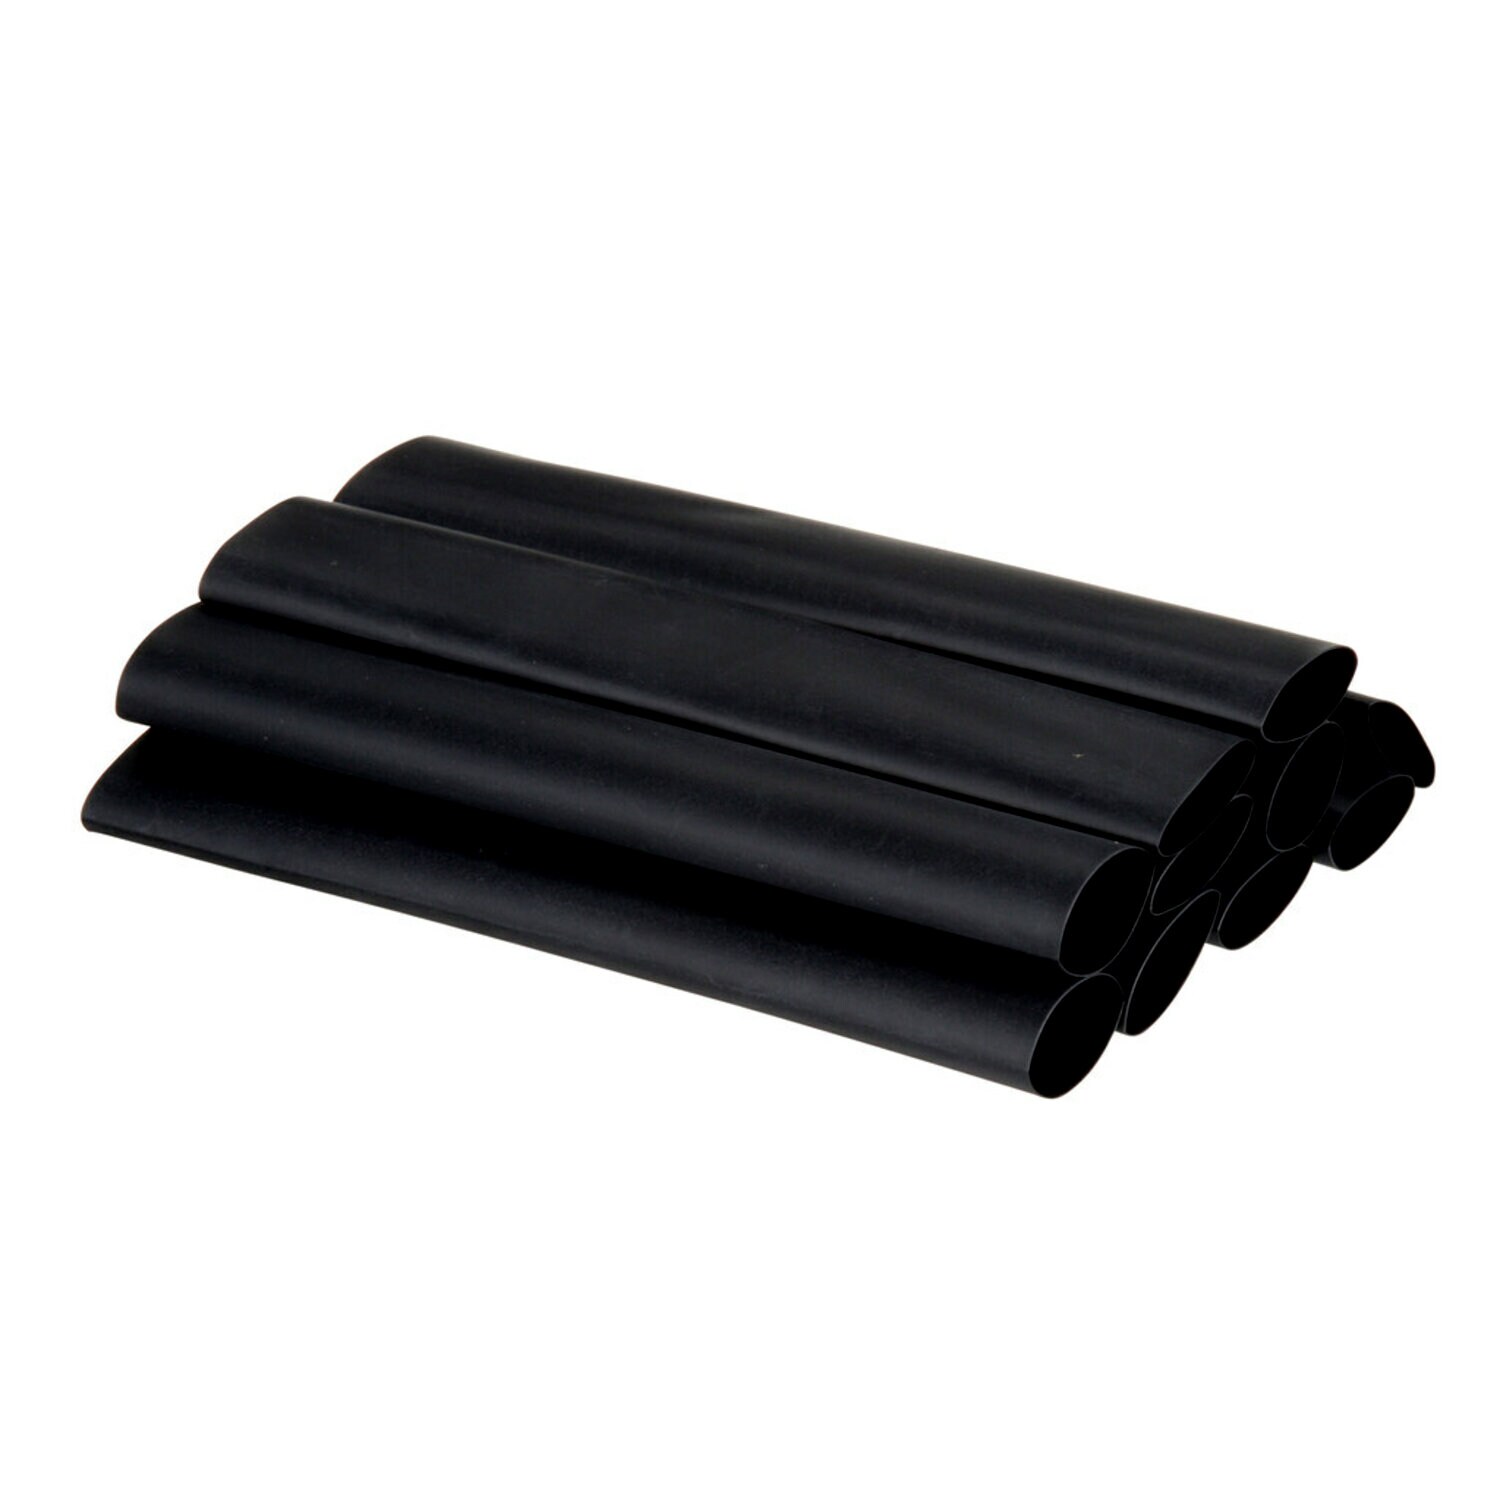 7000133694 - 3M Heat Shrink Thin-Wall Tubing FP-301-3/4-6"-Black-10-10 Pc Pks, 6 in
Length pieces, 10 pieces/pack, 10 packs/case